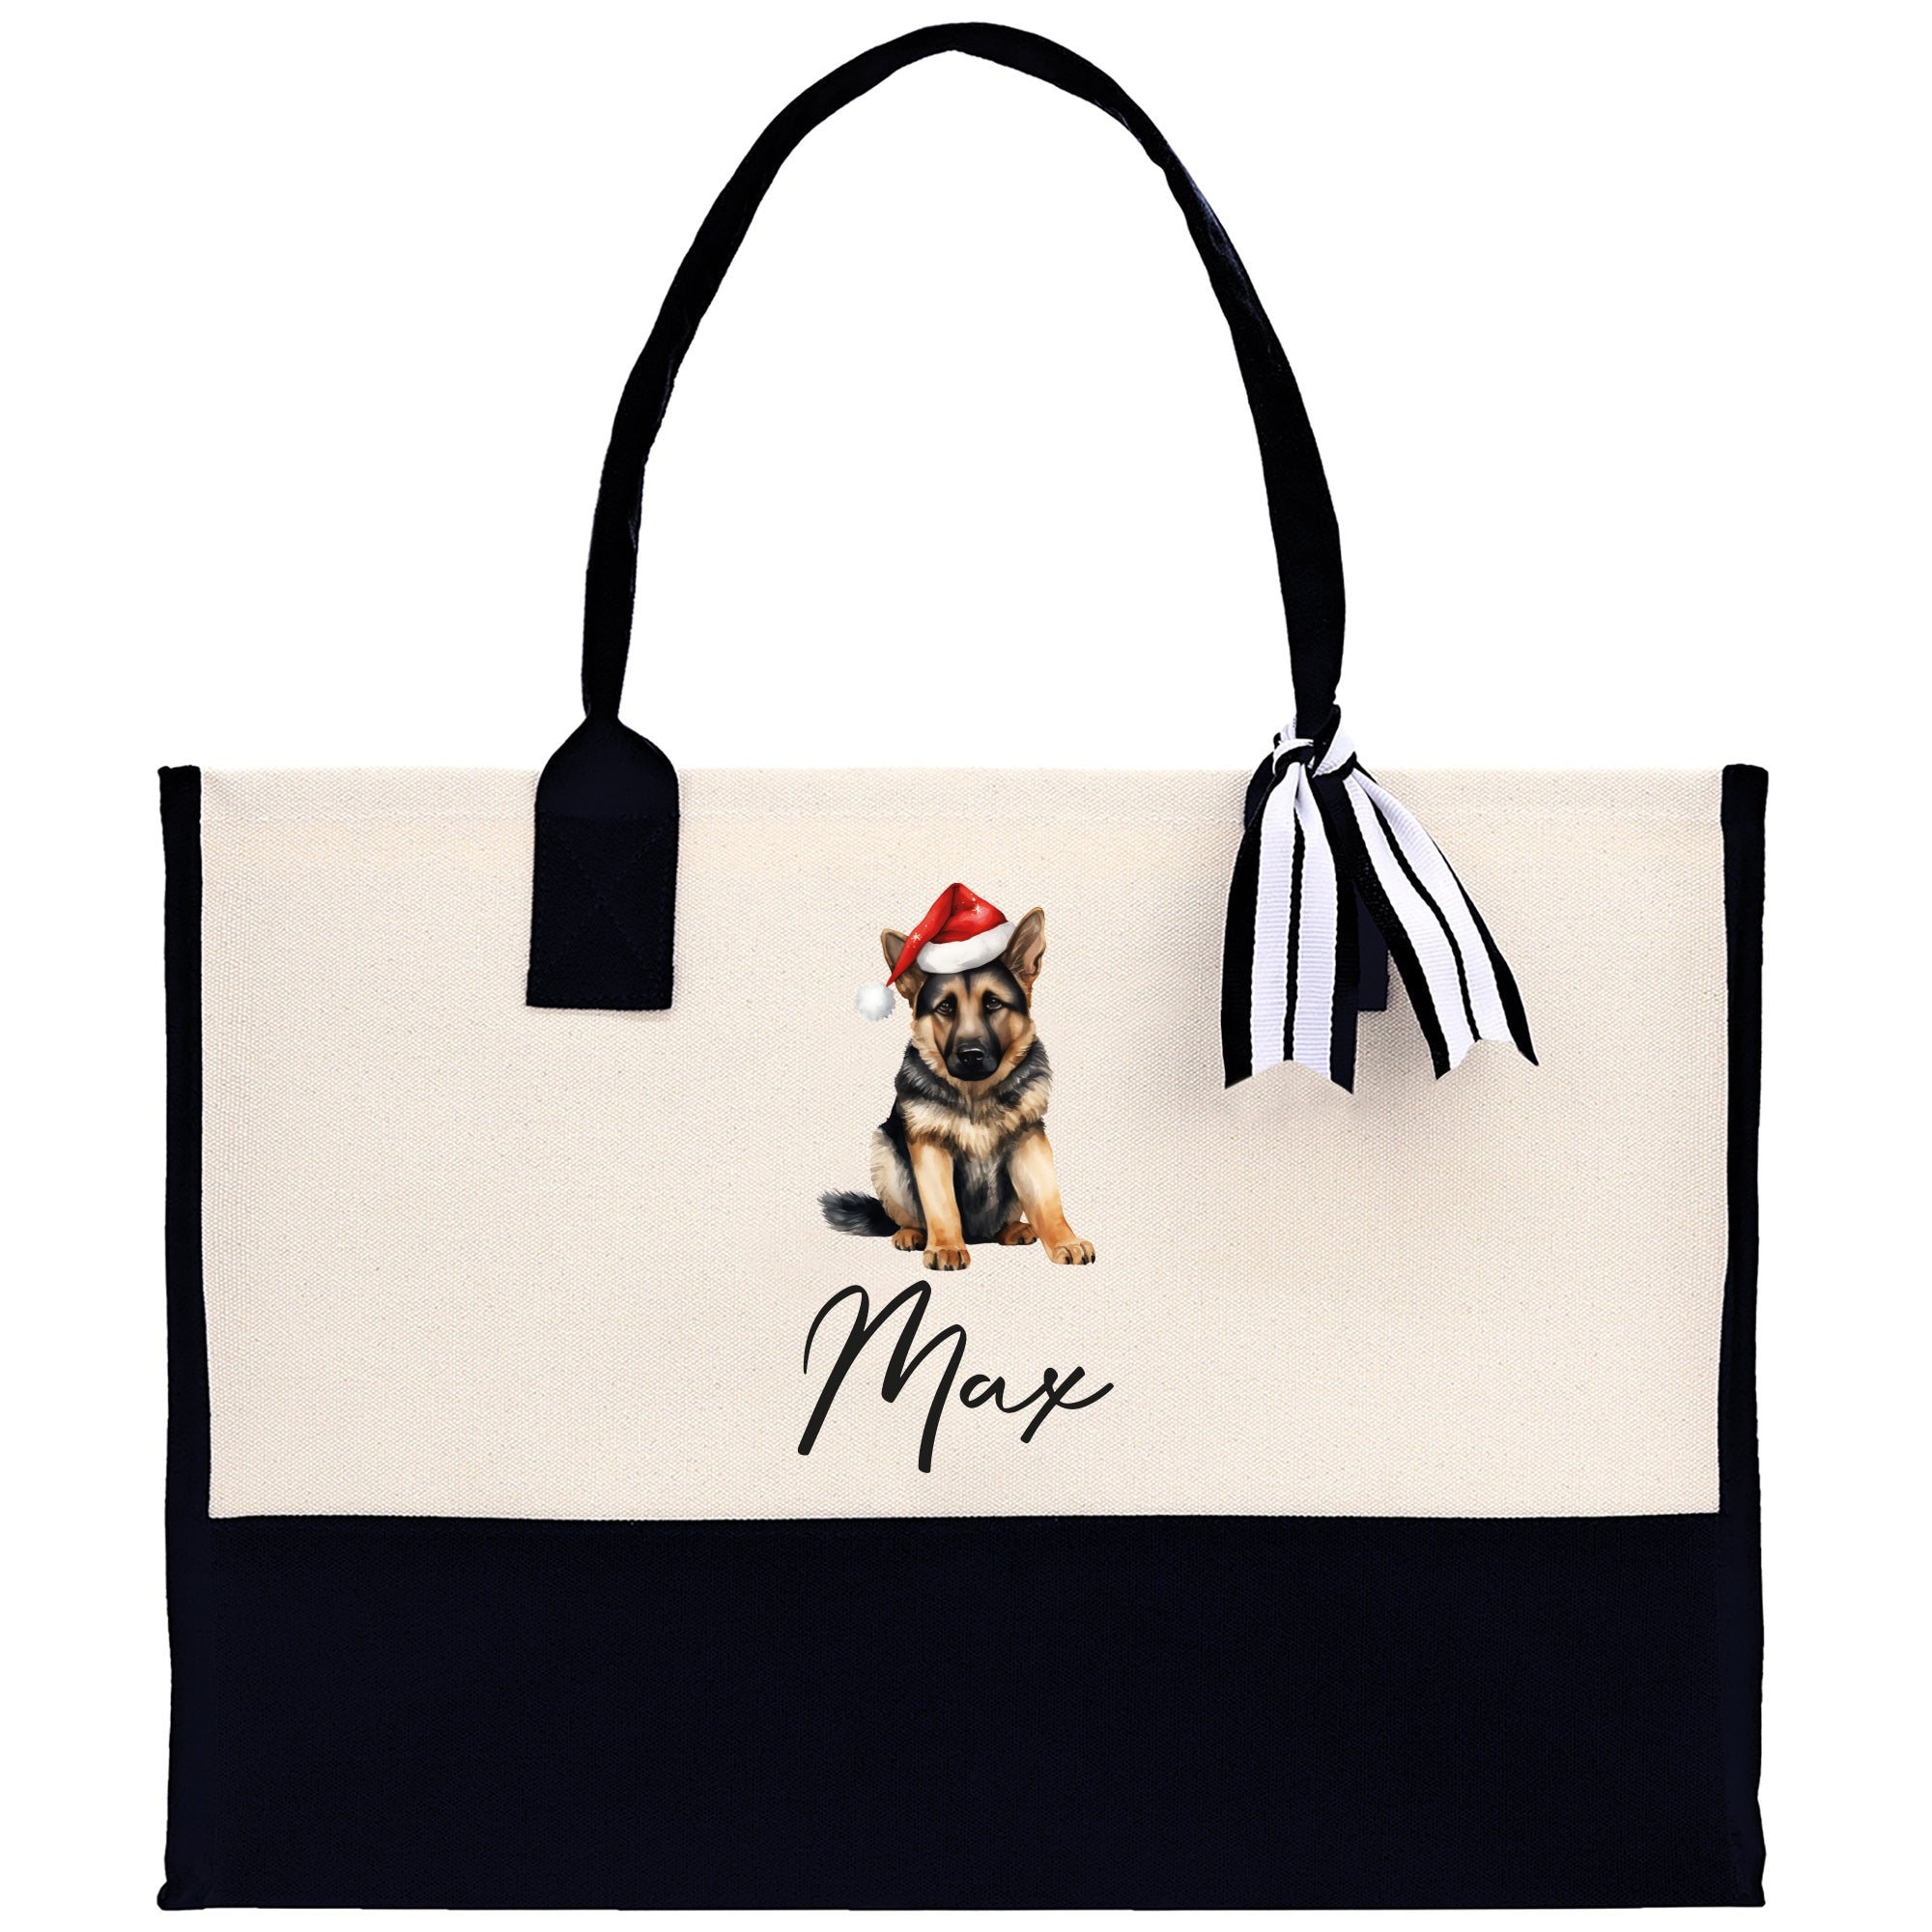 a black and white tote bag with a dog on it